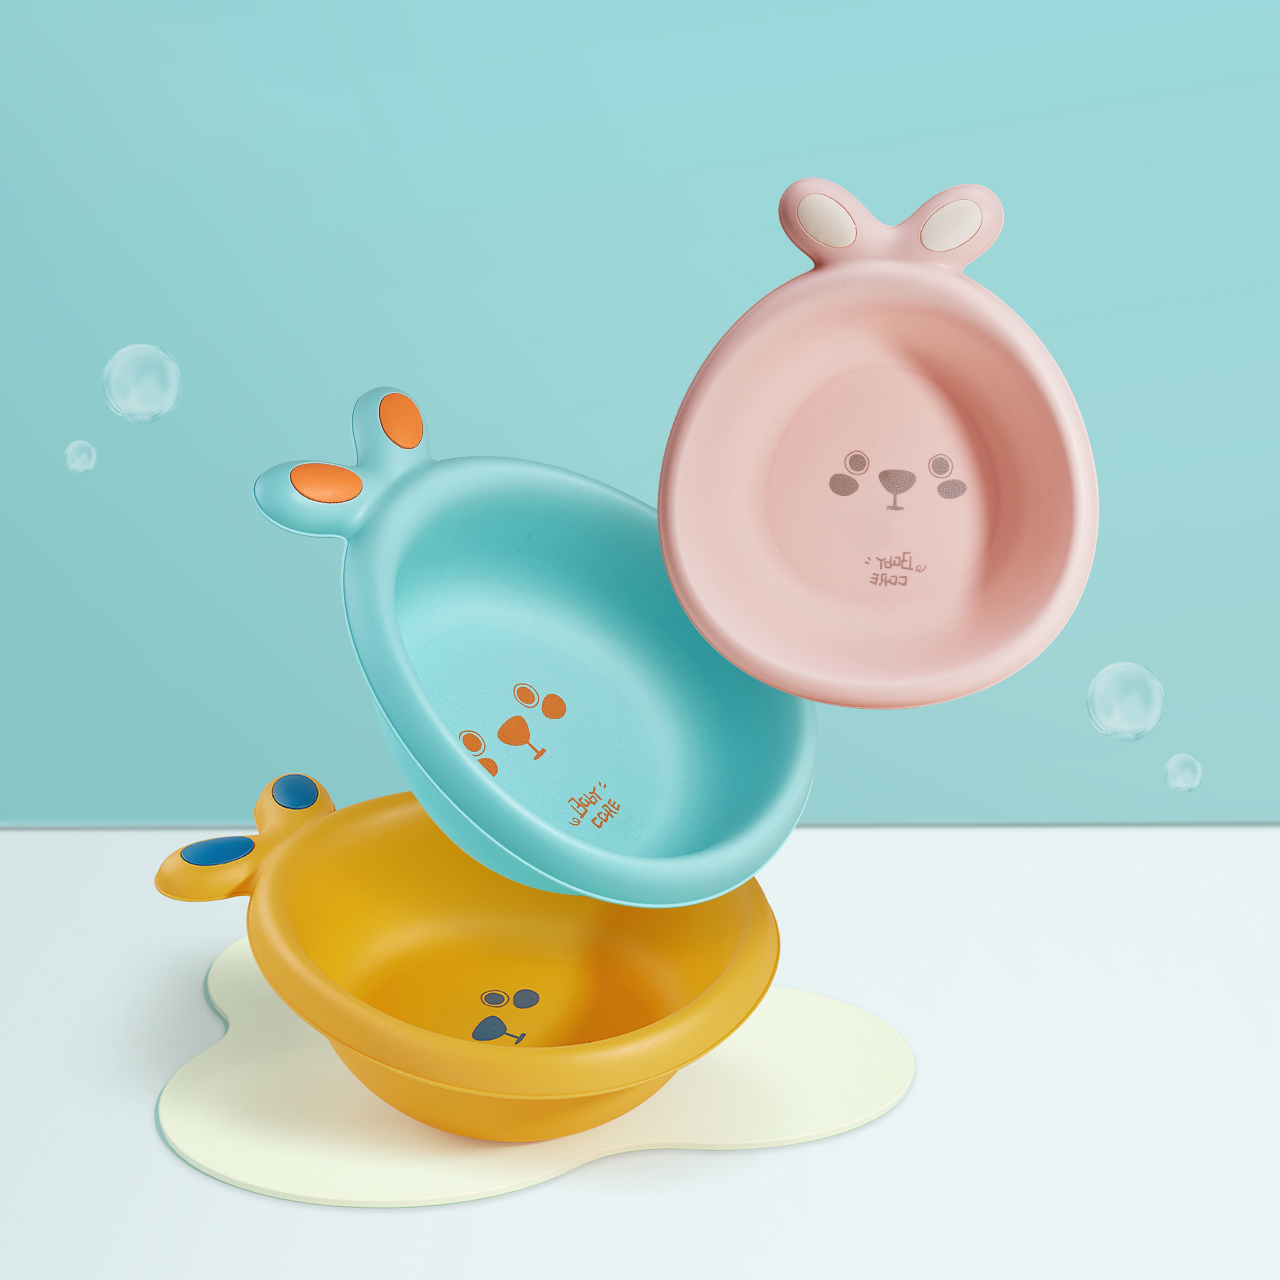 A “Basin” Friend for A Clean Baby